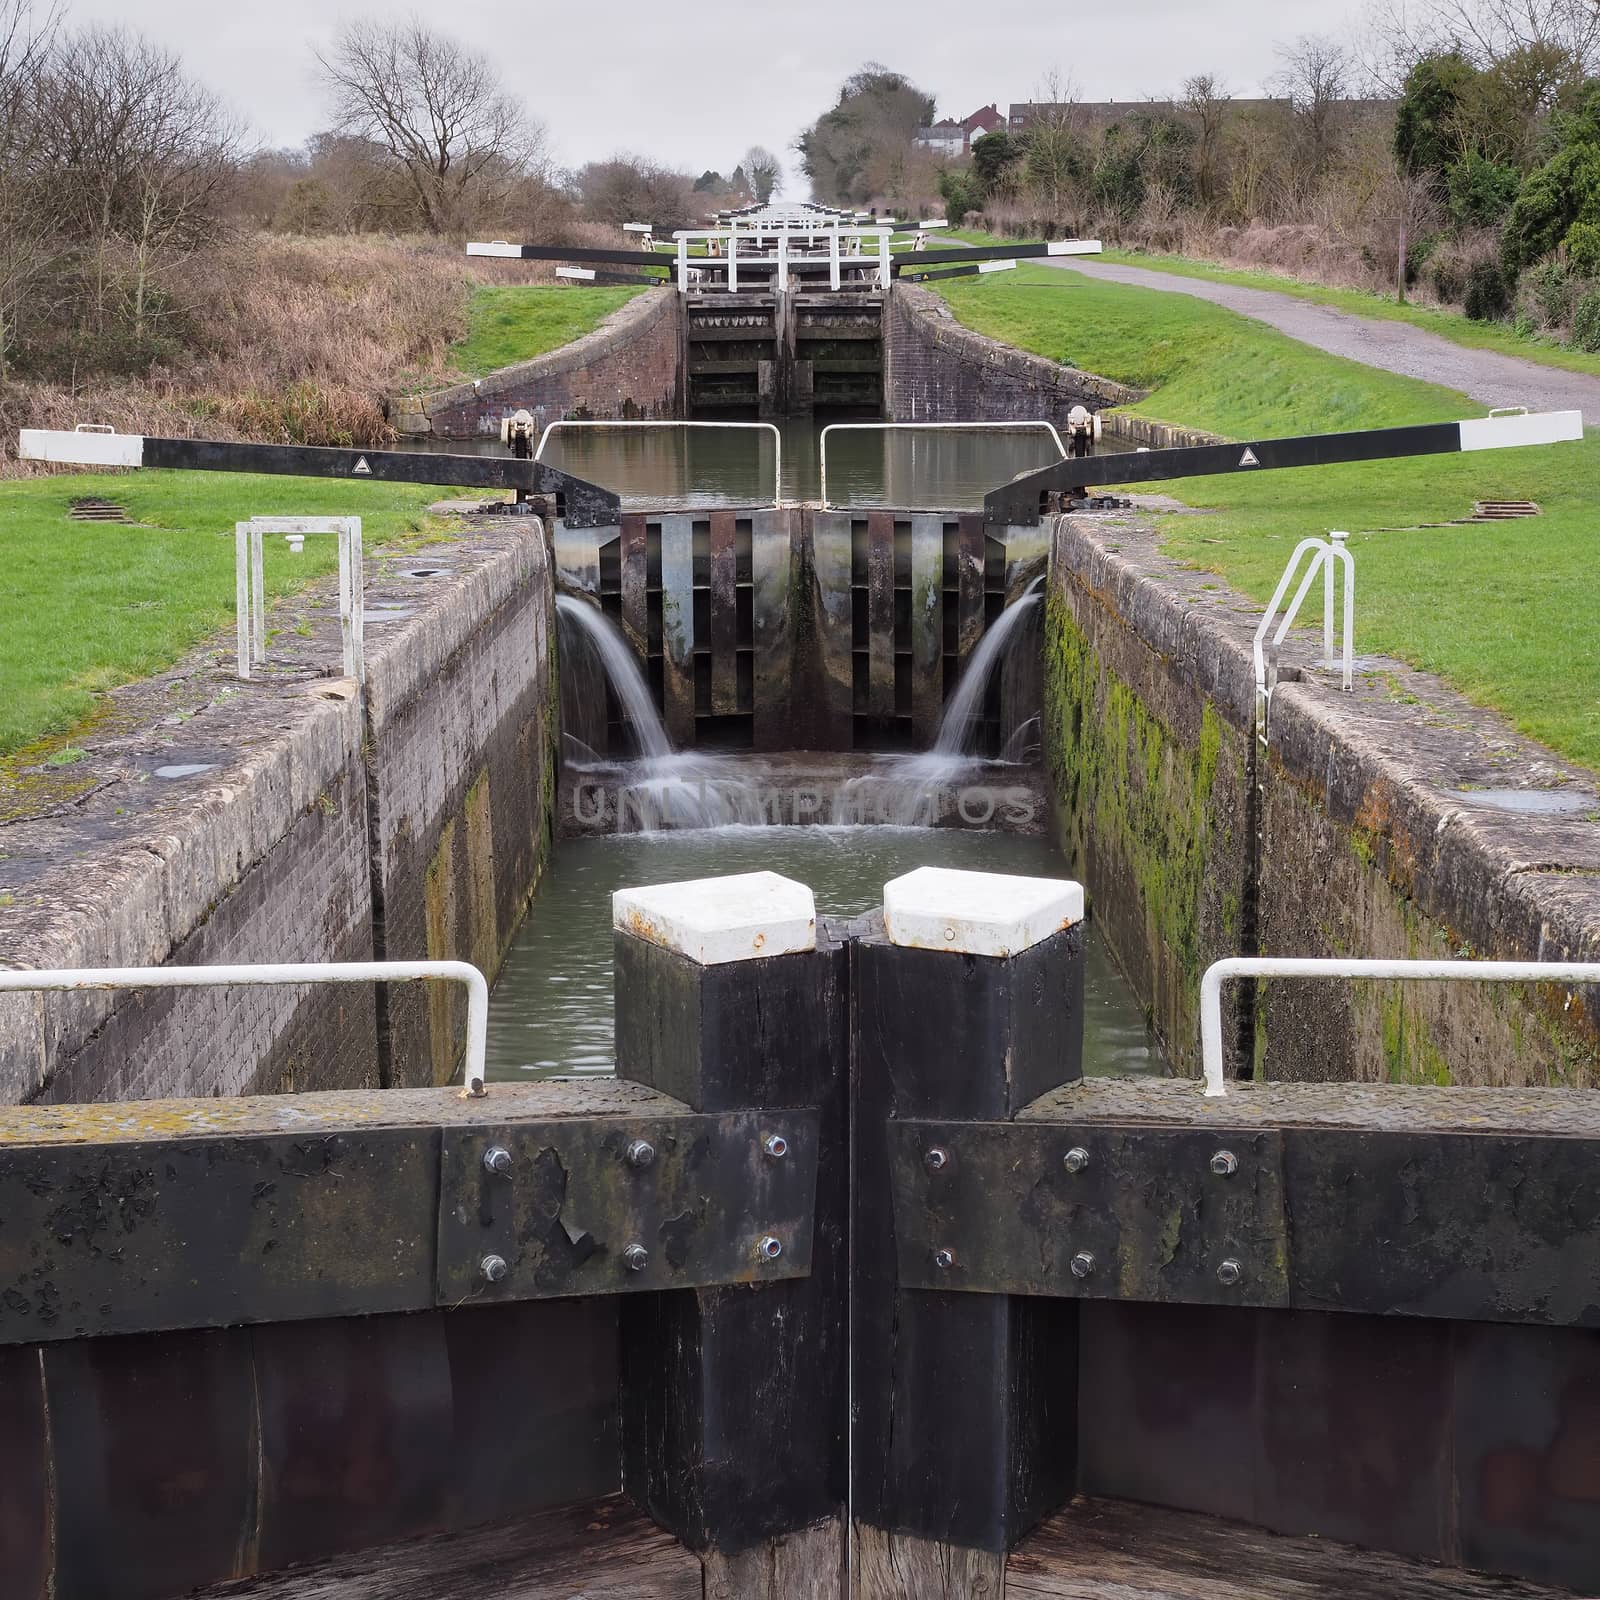 View up the flight of Caen Hill locks from the bottom lock gate on the Kennet and Avon canal, Devizes, Wiltshire, UK